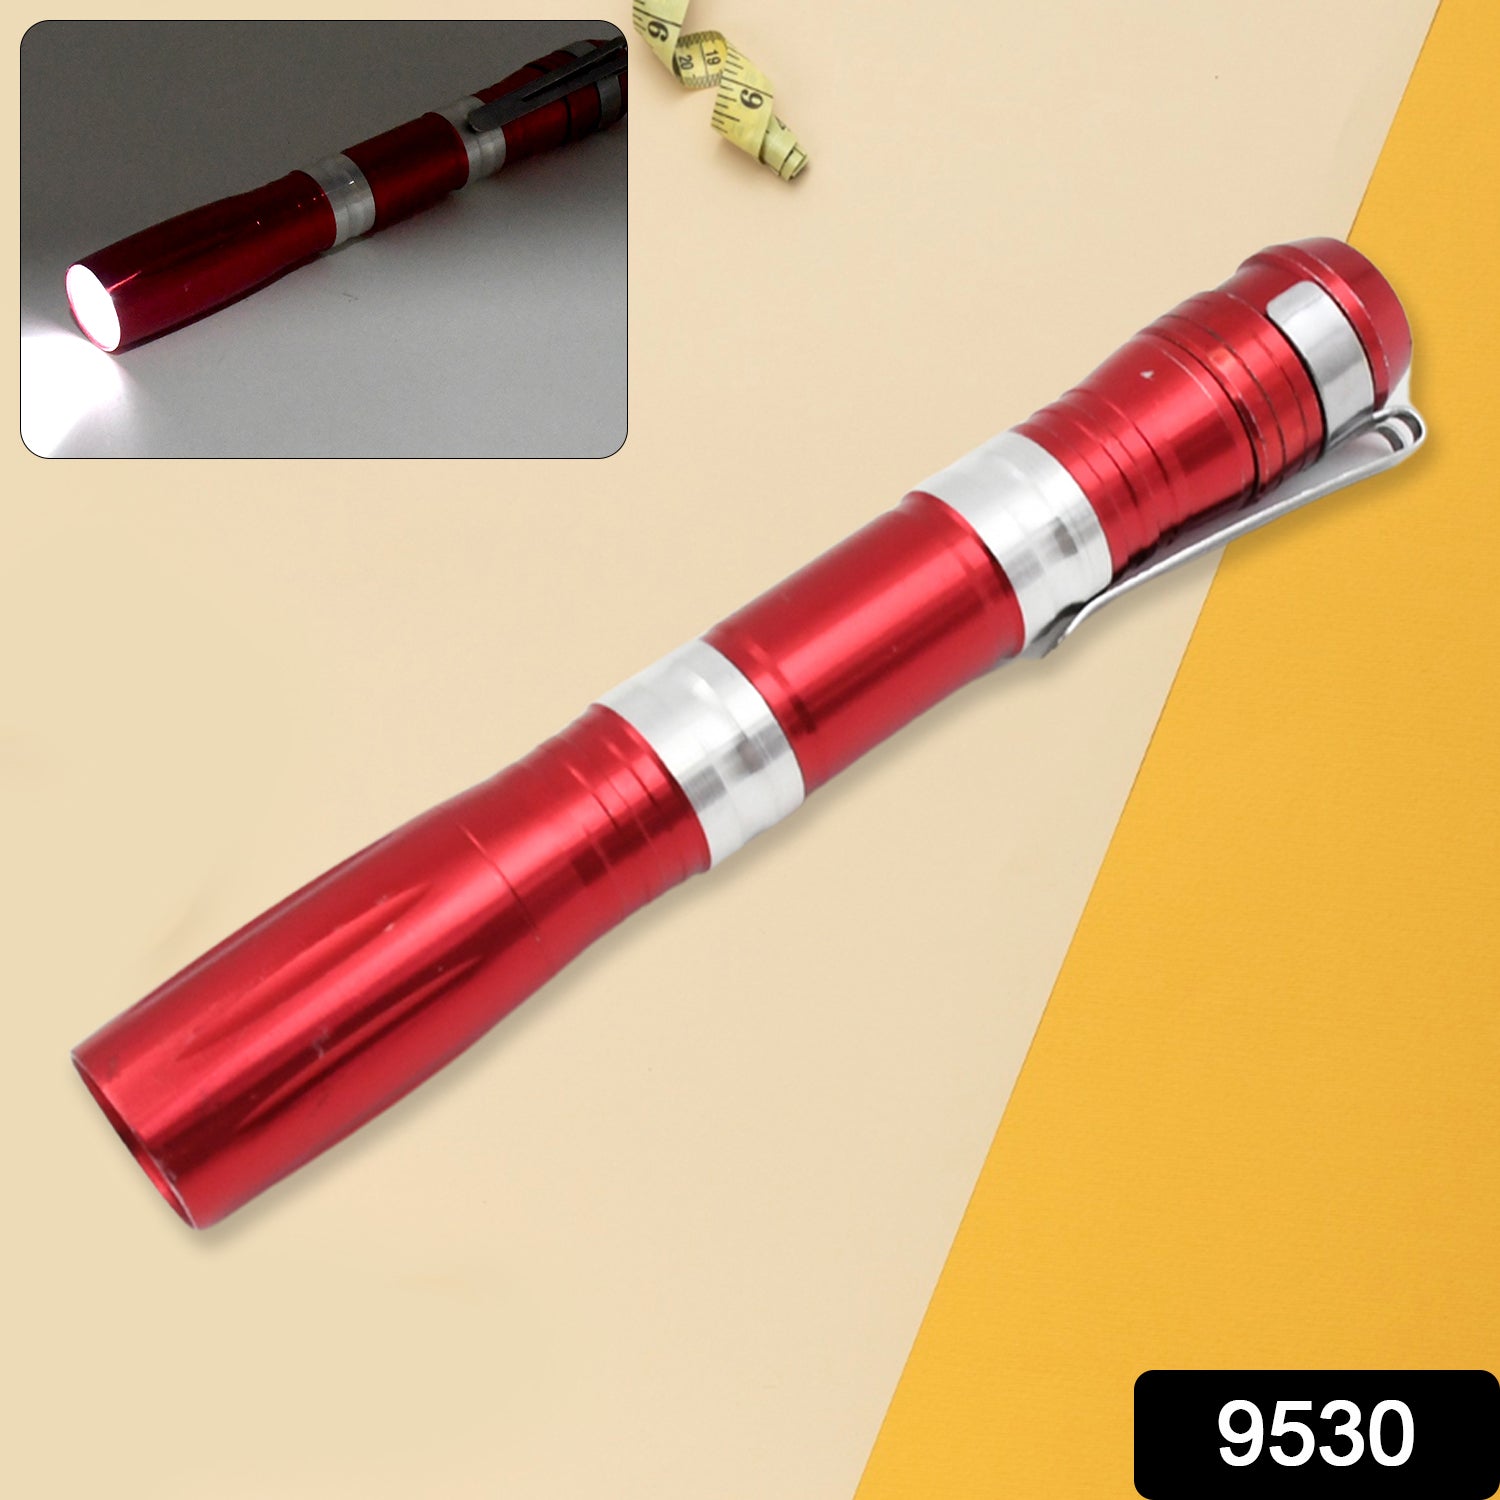 9530 Portable Mini Torch / Flashlight LED Powerful High Lumens Pen Light with Clip, Portable Pocket Compact Torch for Emergency AA Battery operated (1 Pc / Battery not included)